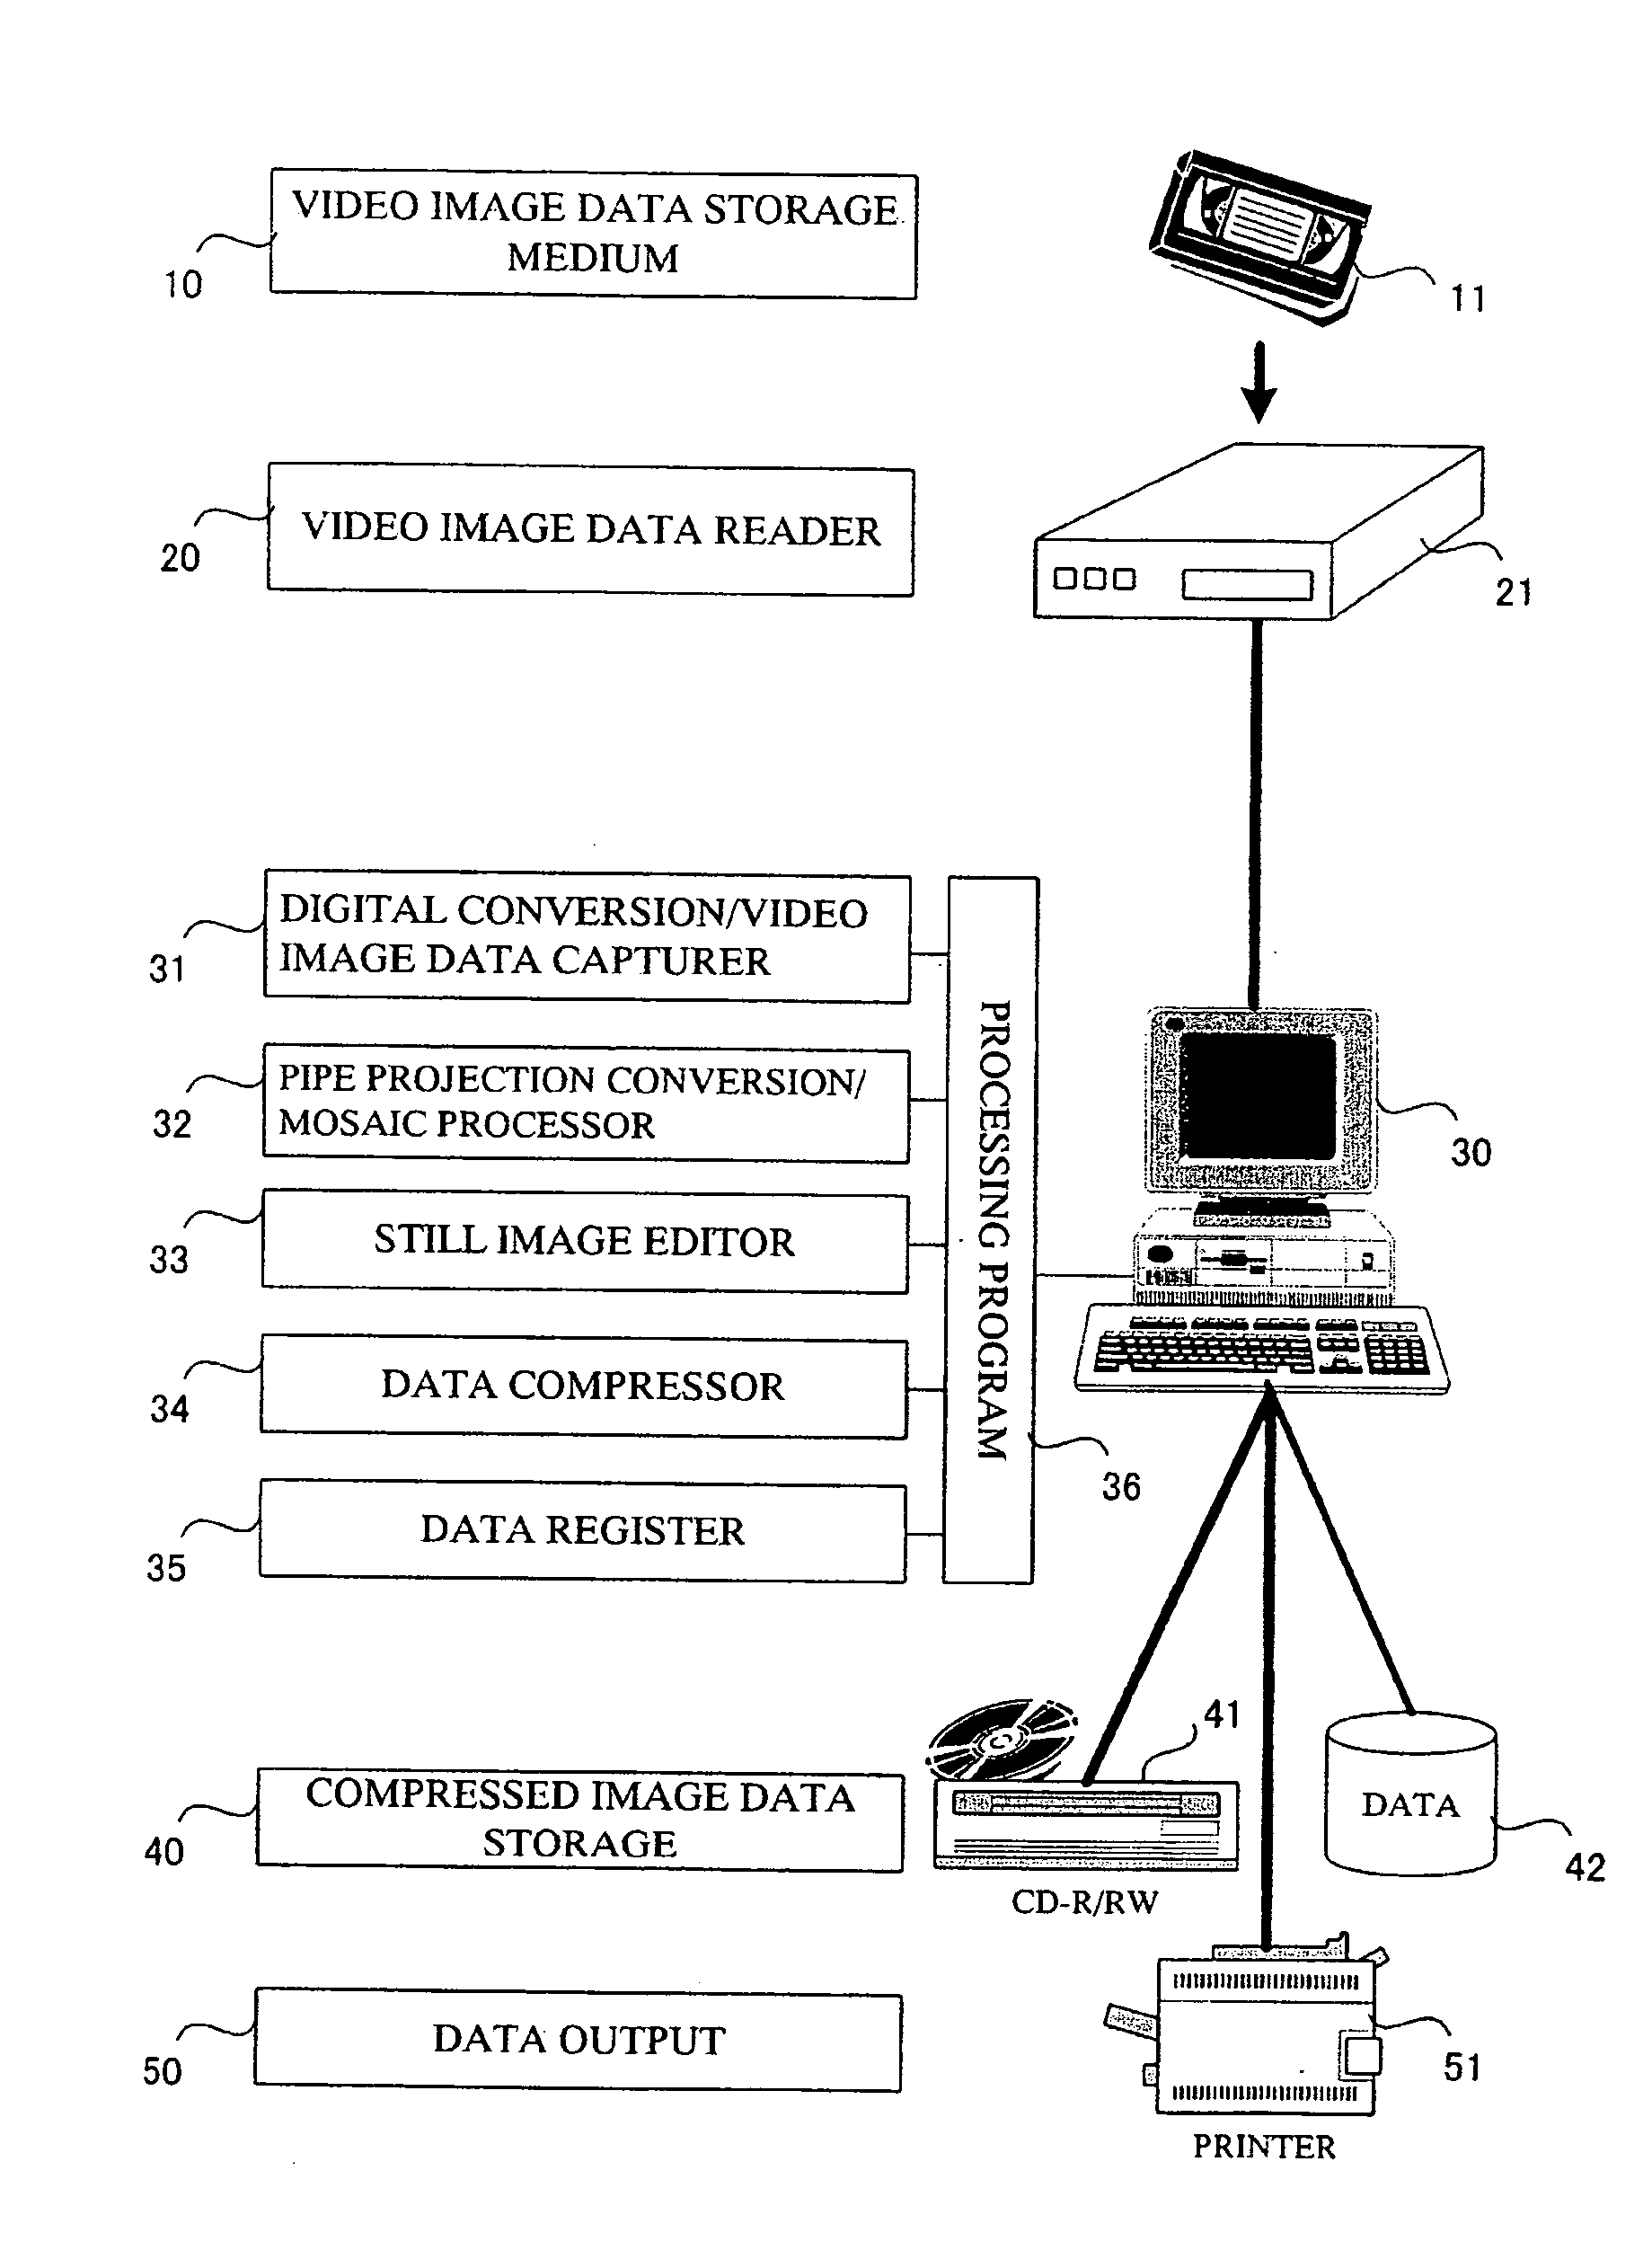 System for automatically generating continuous developed still image from video image of inner wall of tubular object